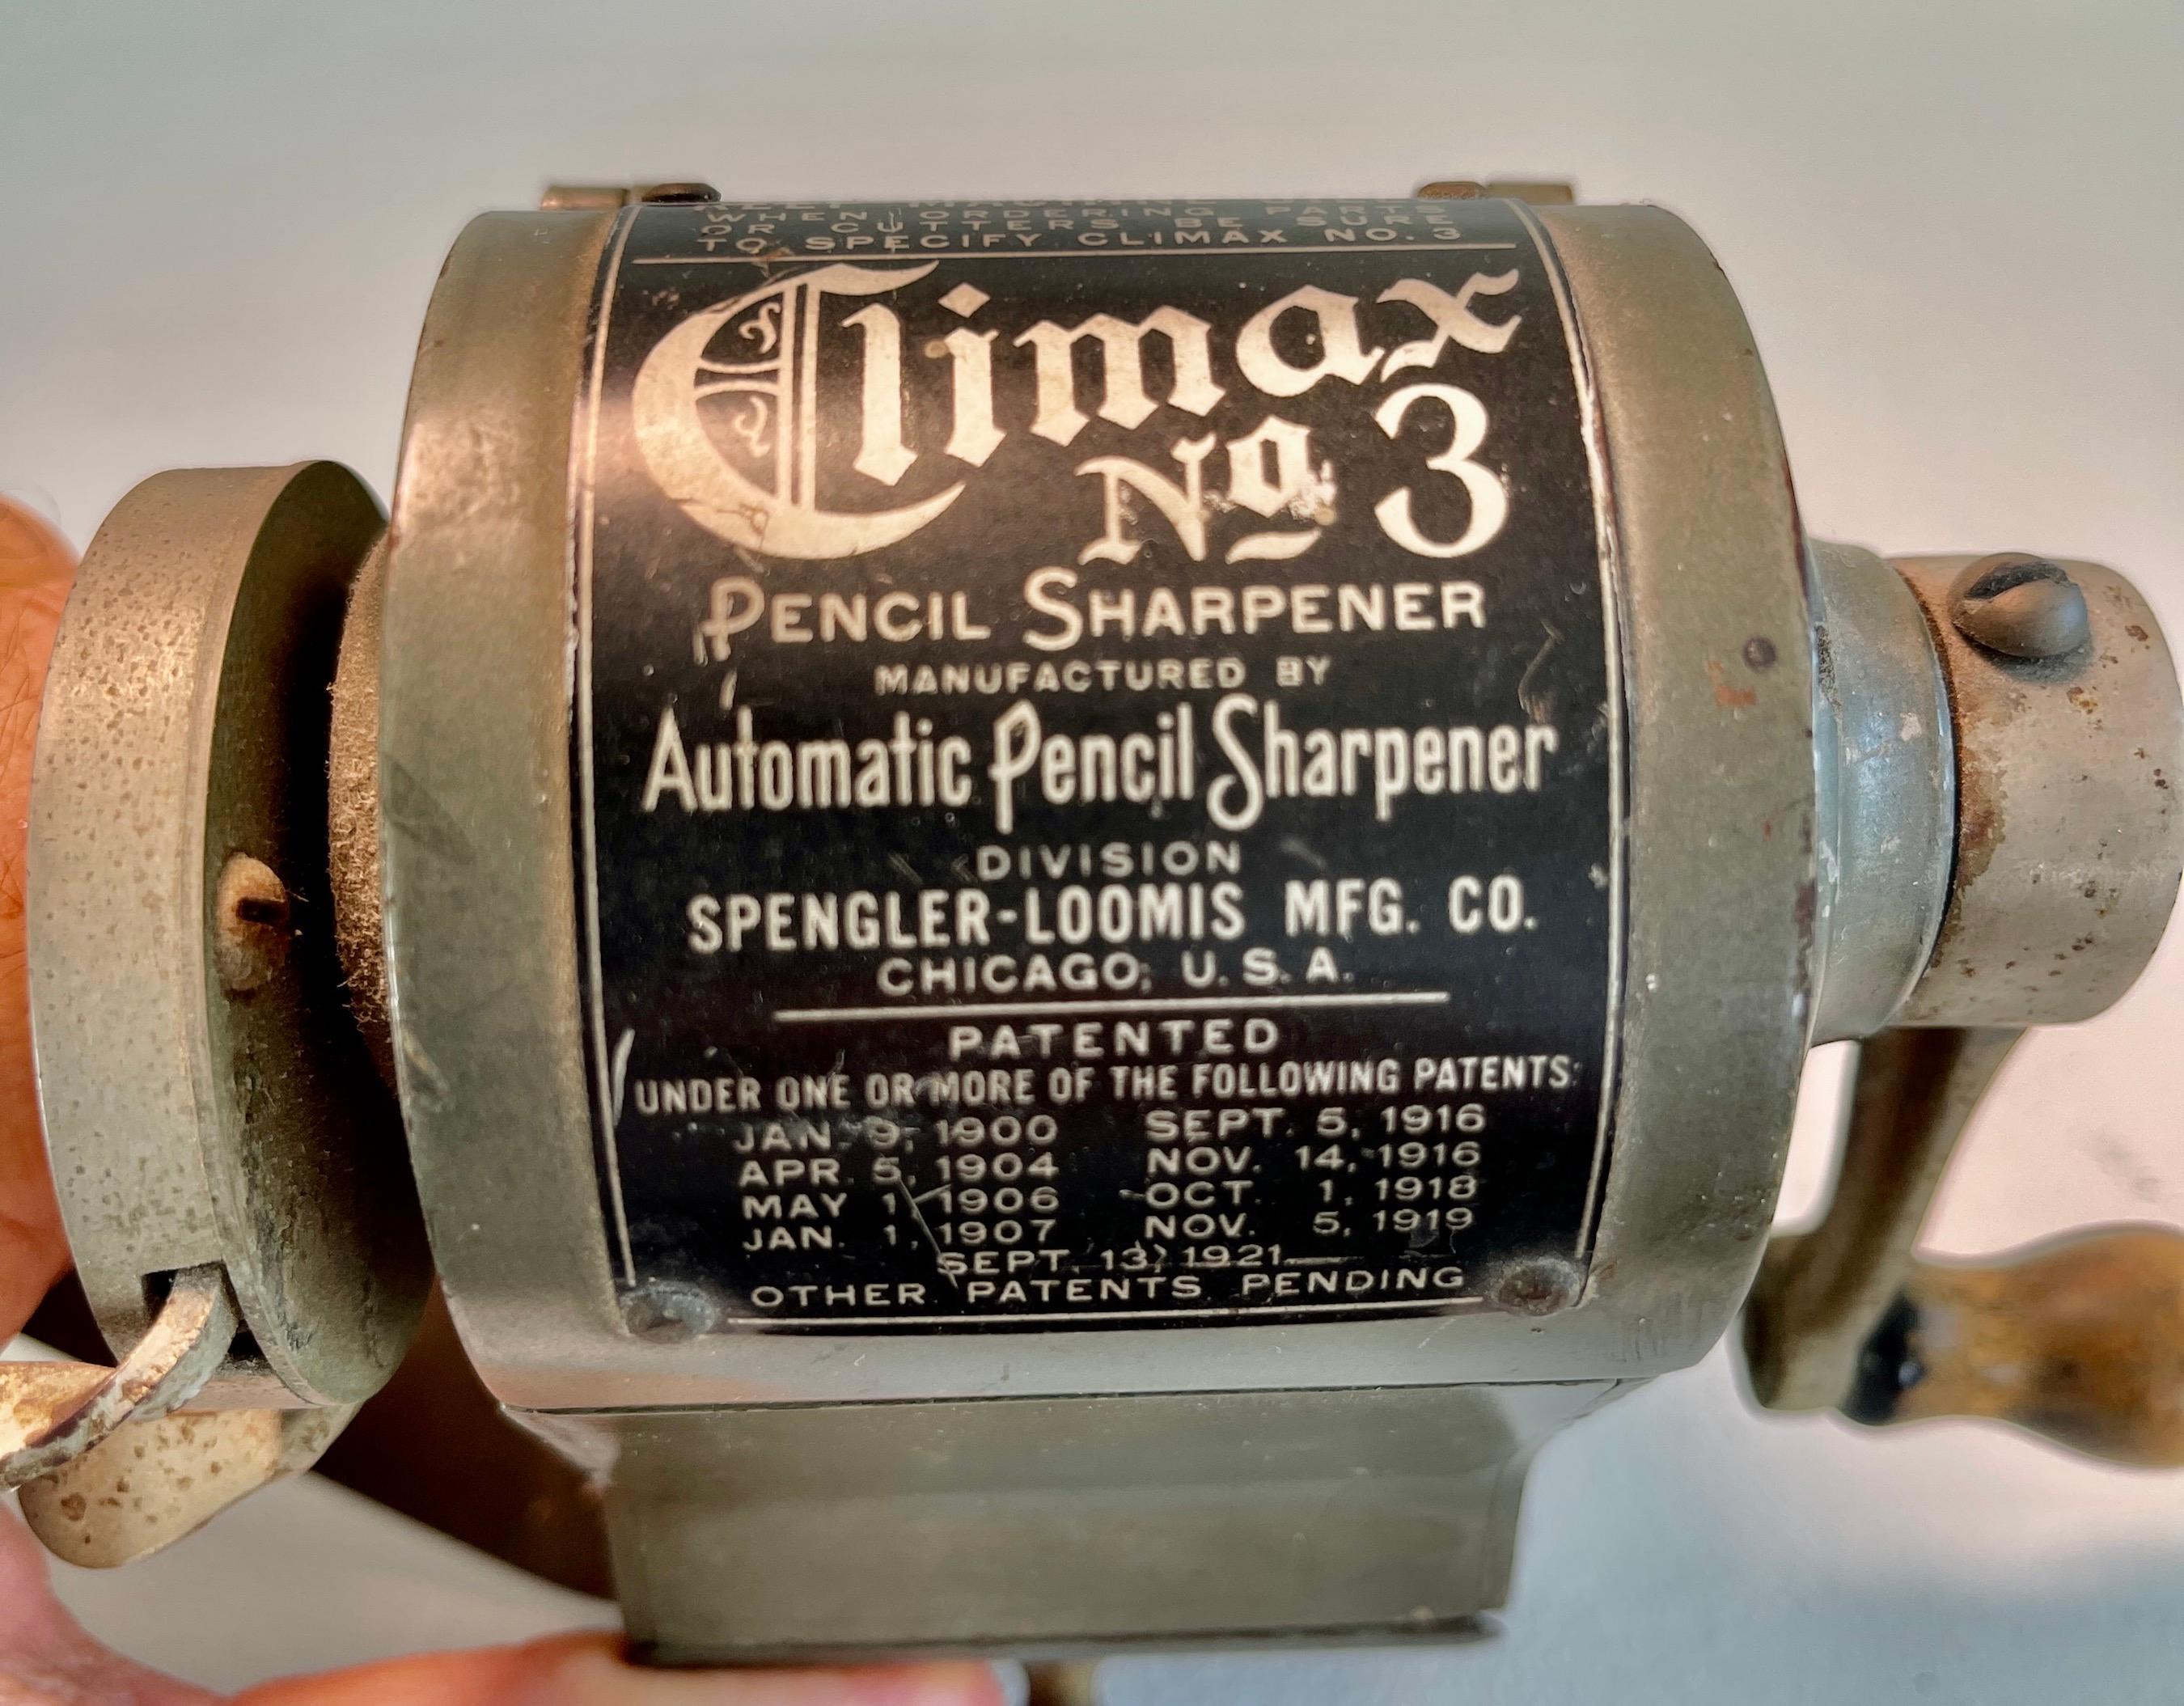 Climax No. 3 Industrial Pencil Sharpener. 
Automatic Pencil Sharpener a division of the Spengler-Loomis MFG Co., They were one of several companies between 1910 - 1915 that introduced one or two Cylindrical Cutters and there different models of this